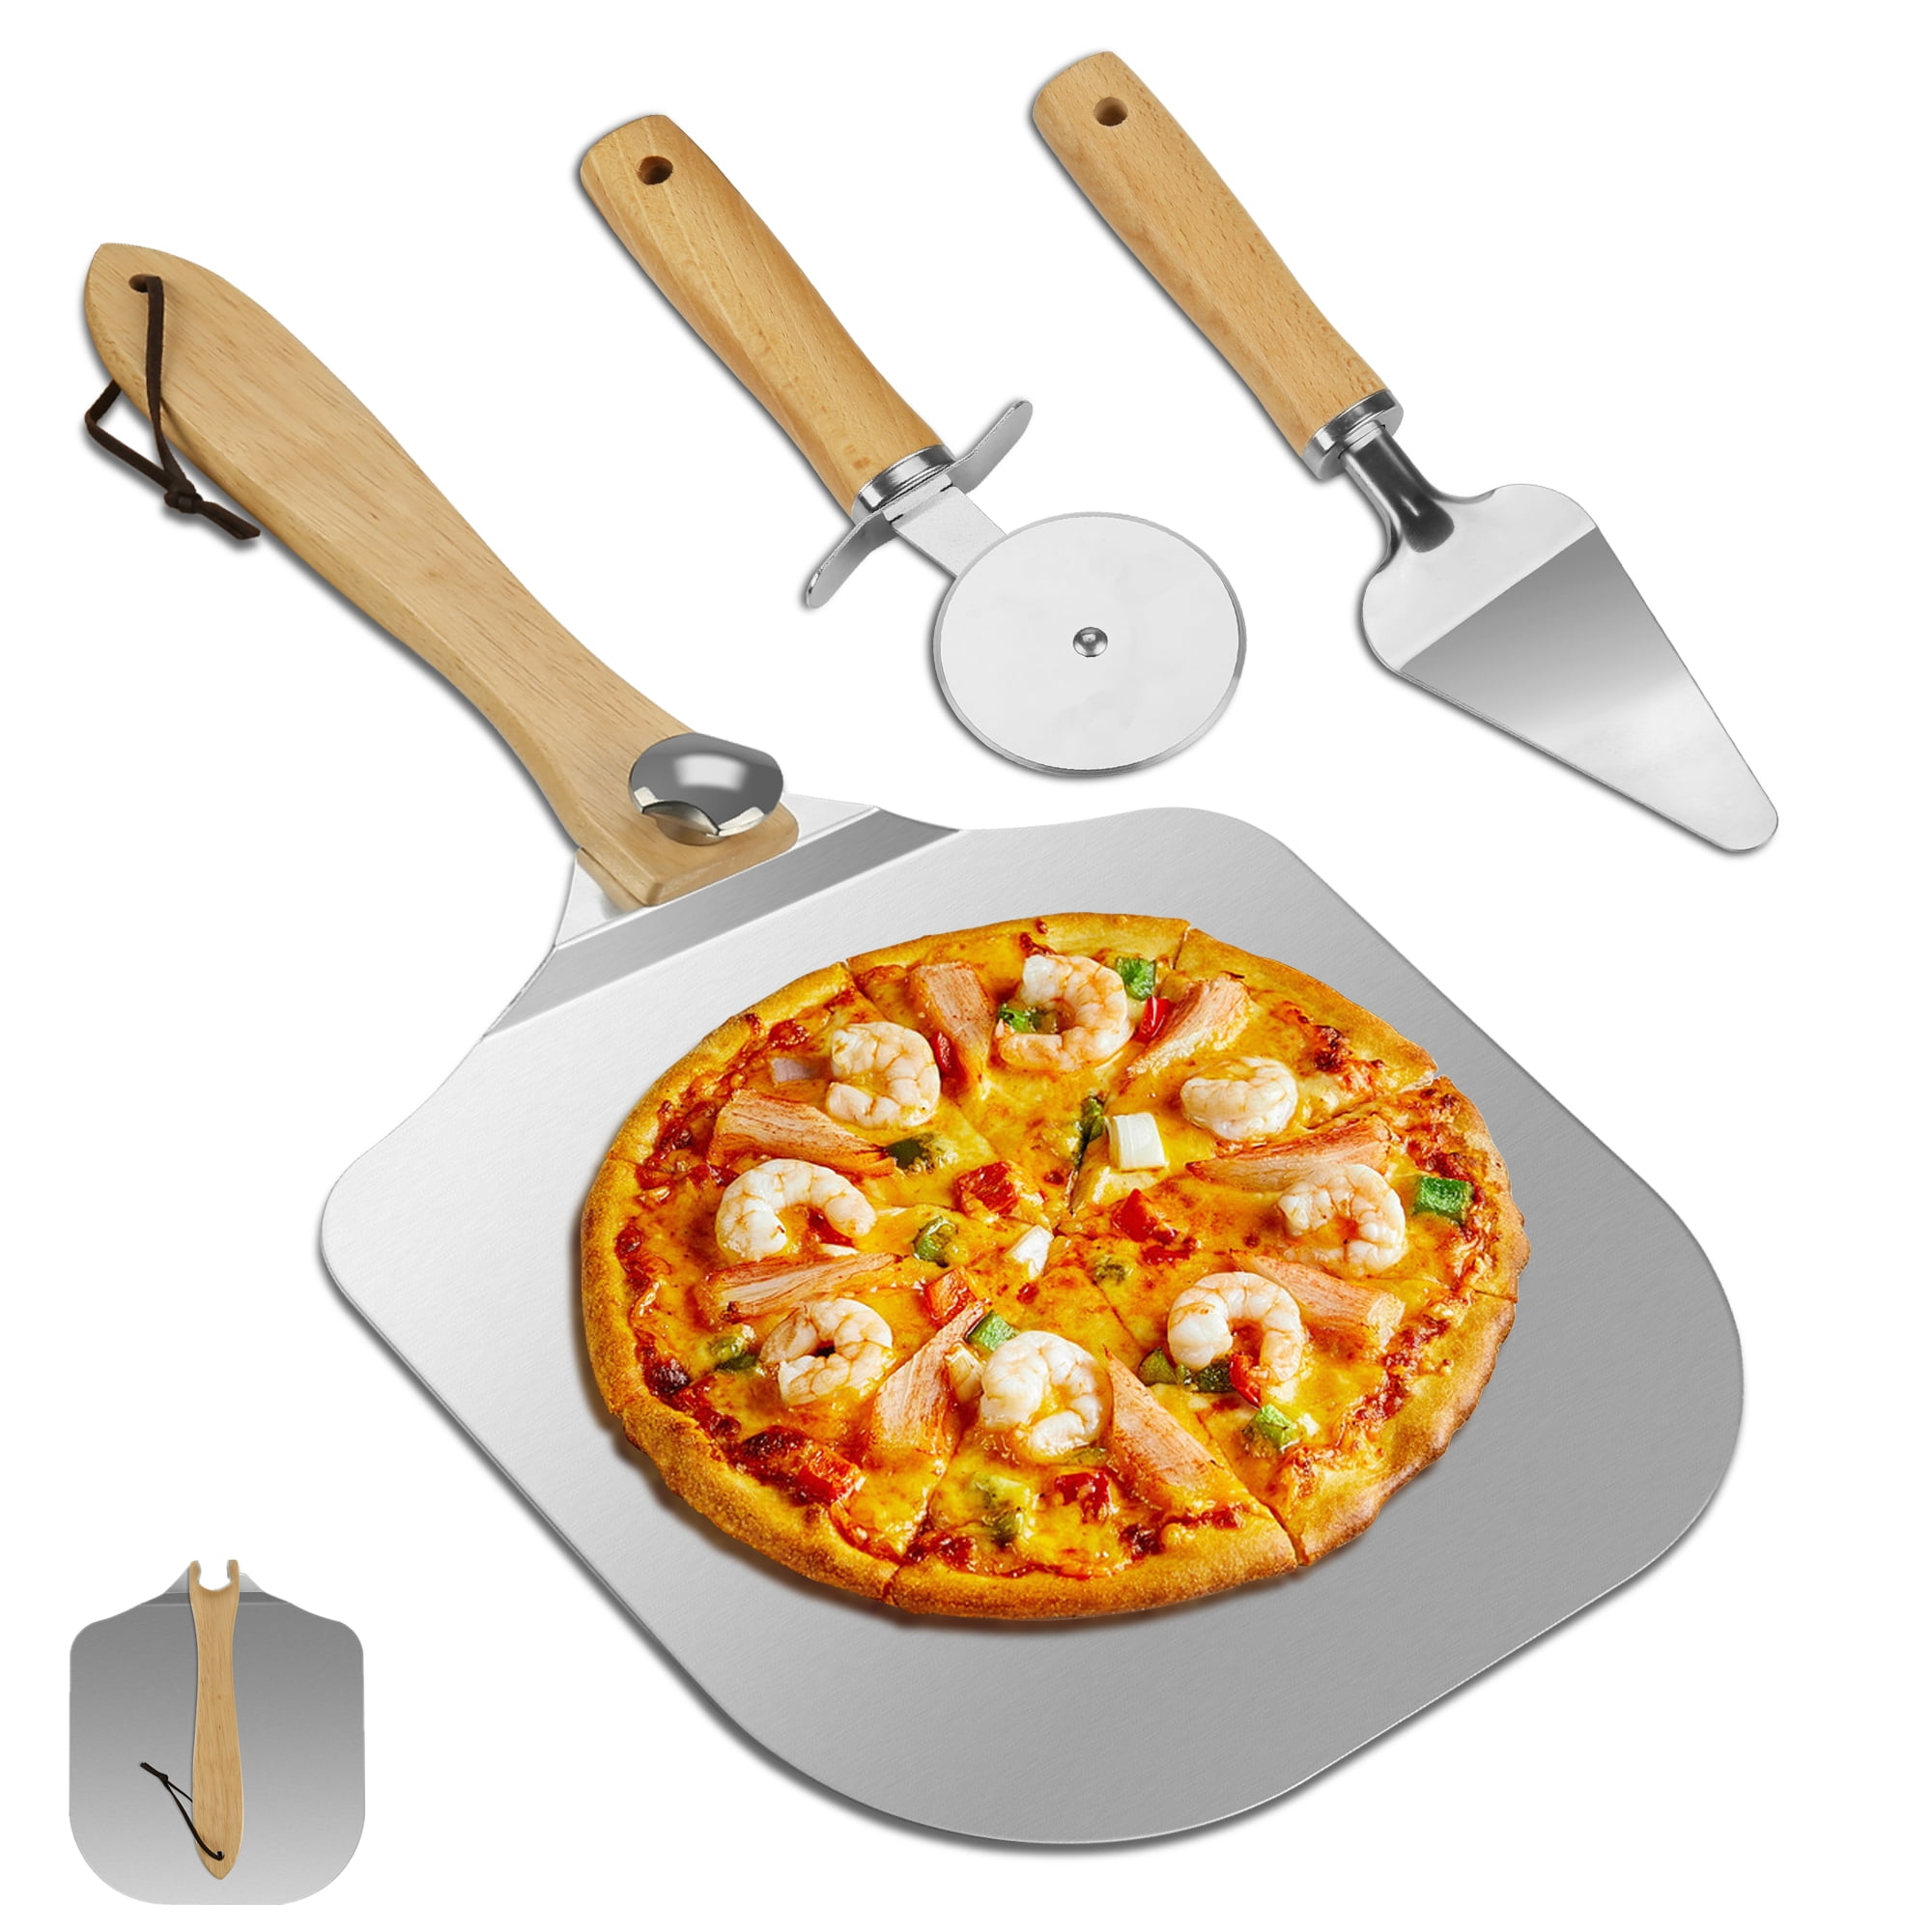 Pizza Peel Wood Large Pizza Paddle Ideal for for Baking Homemade Pizza Bread 3pcs Pizza Spatula for Oven or Grill 